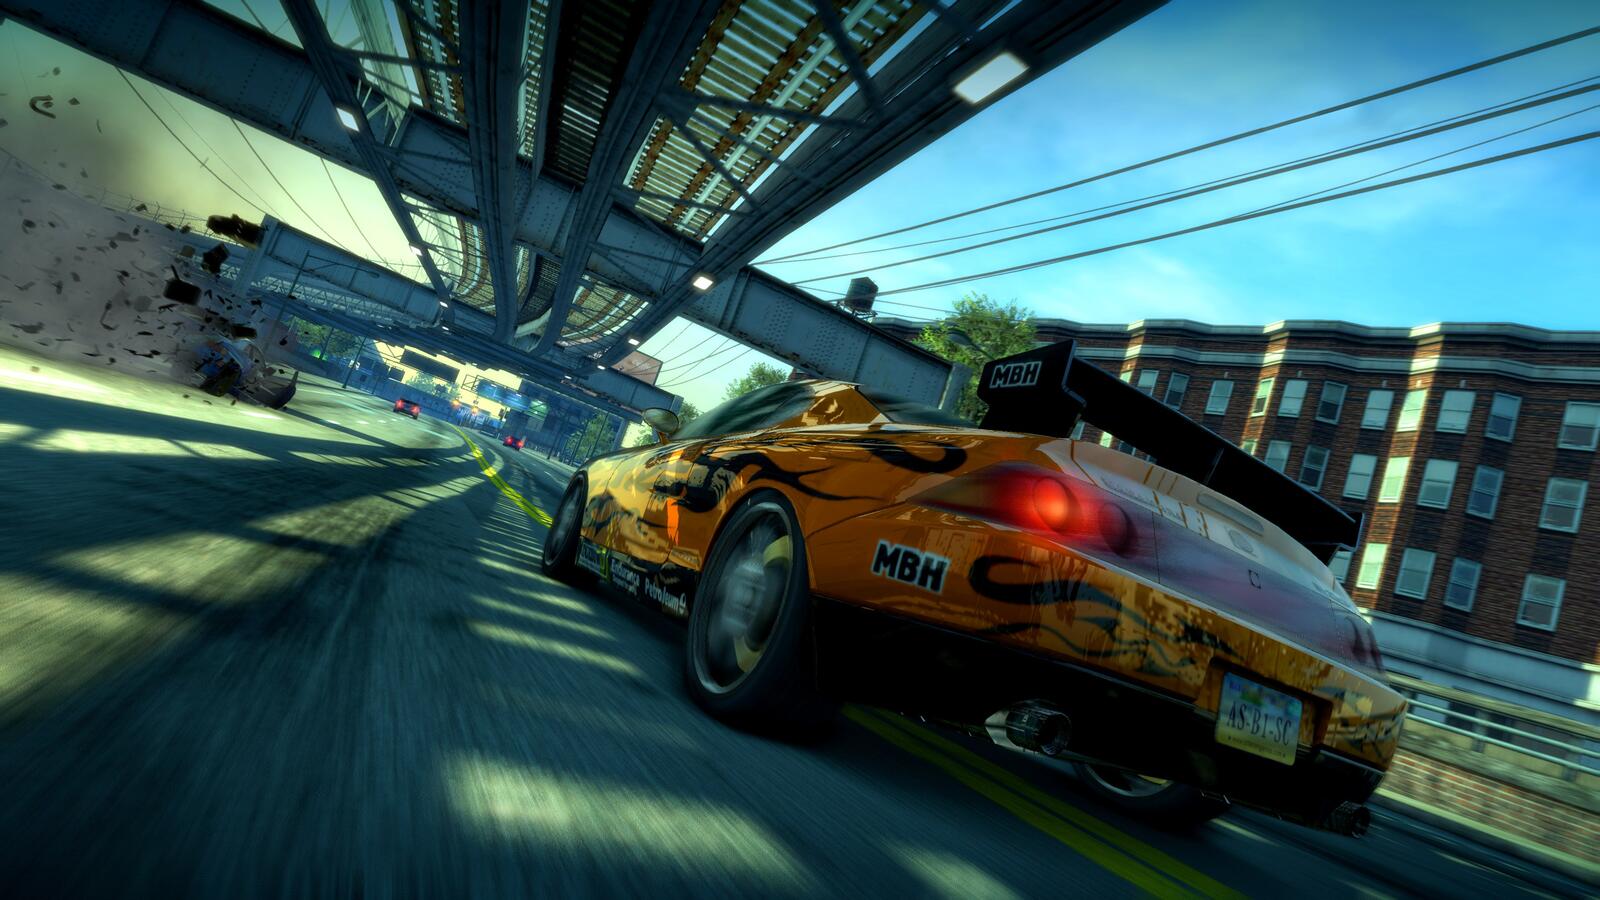 Wallpapers in move games burnout paradise on the desktop